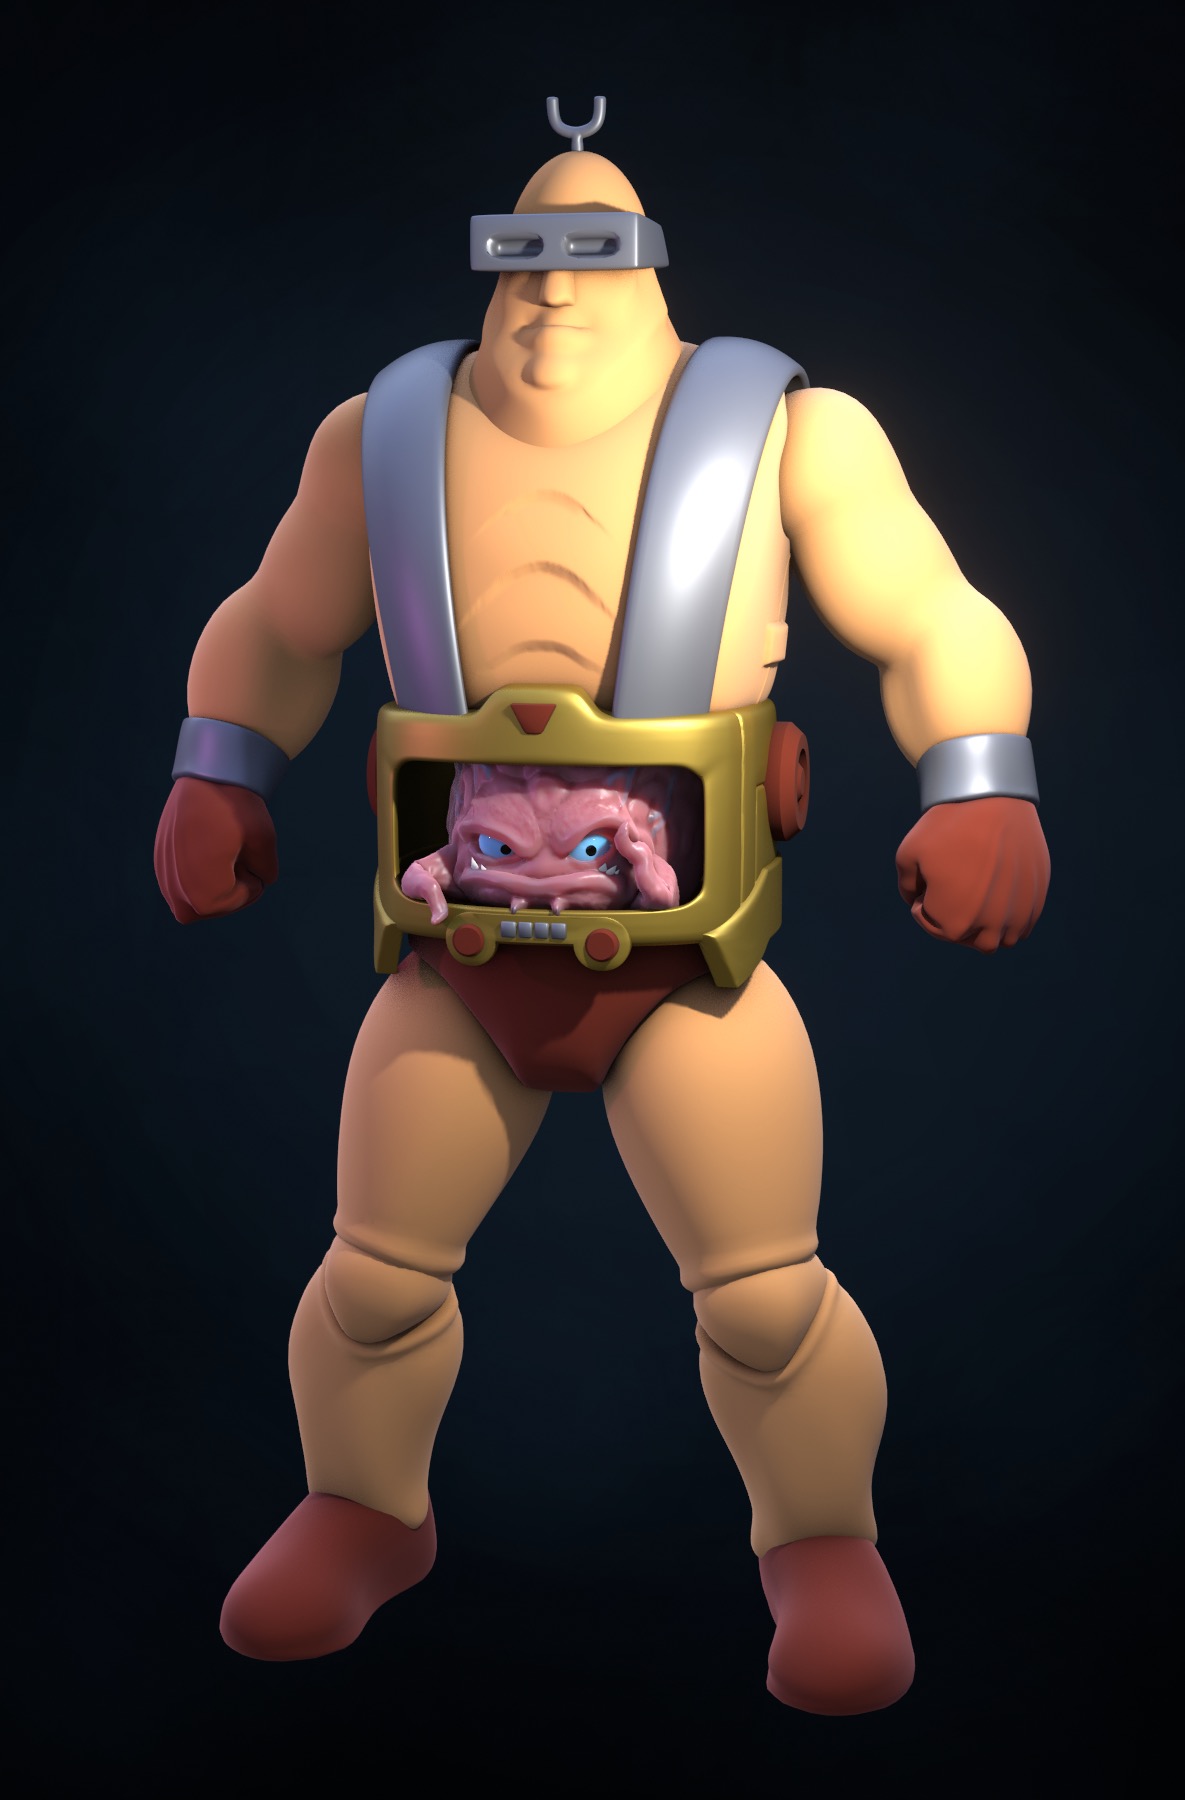 An Incomplete Krang, But Still Cool IMHO